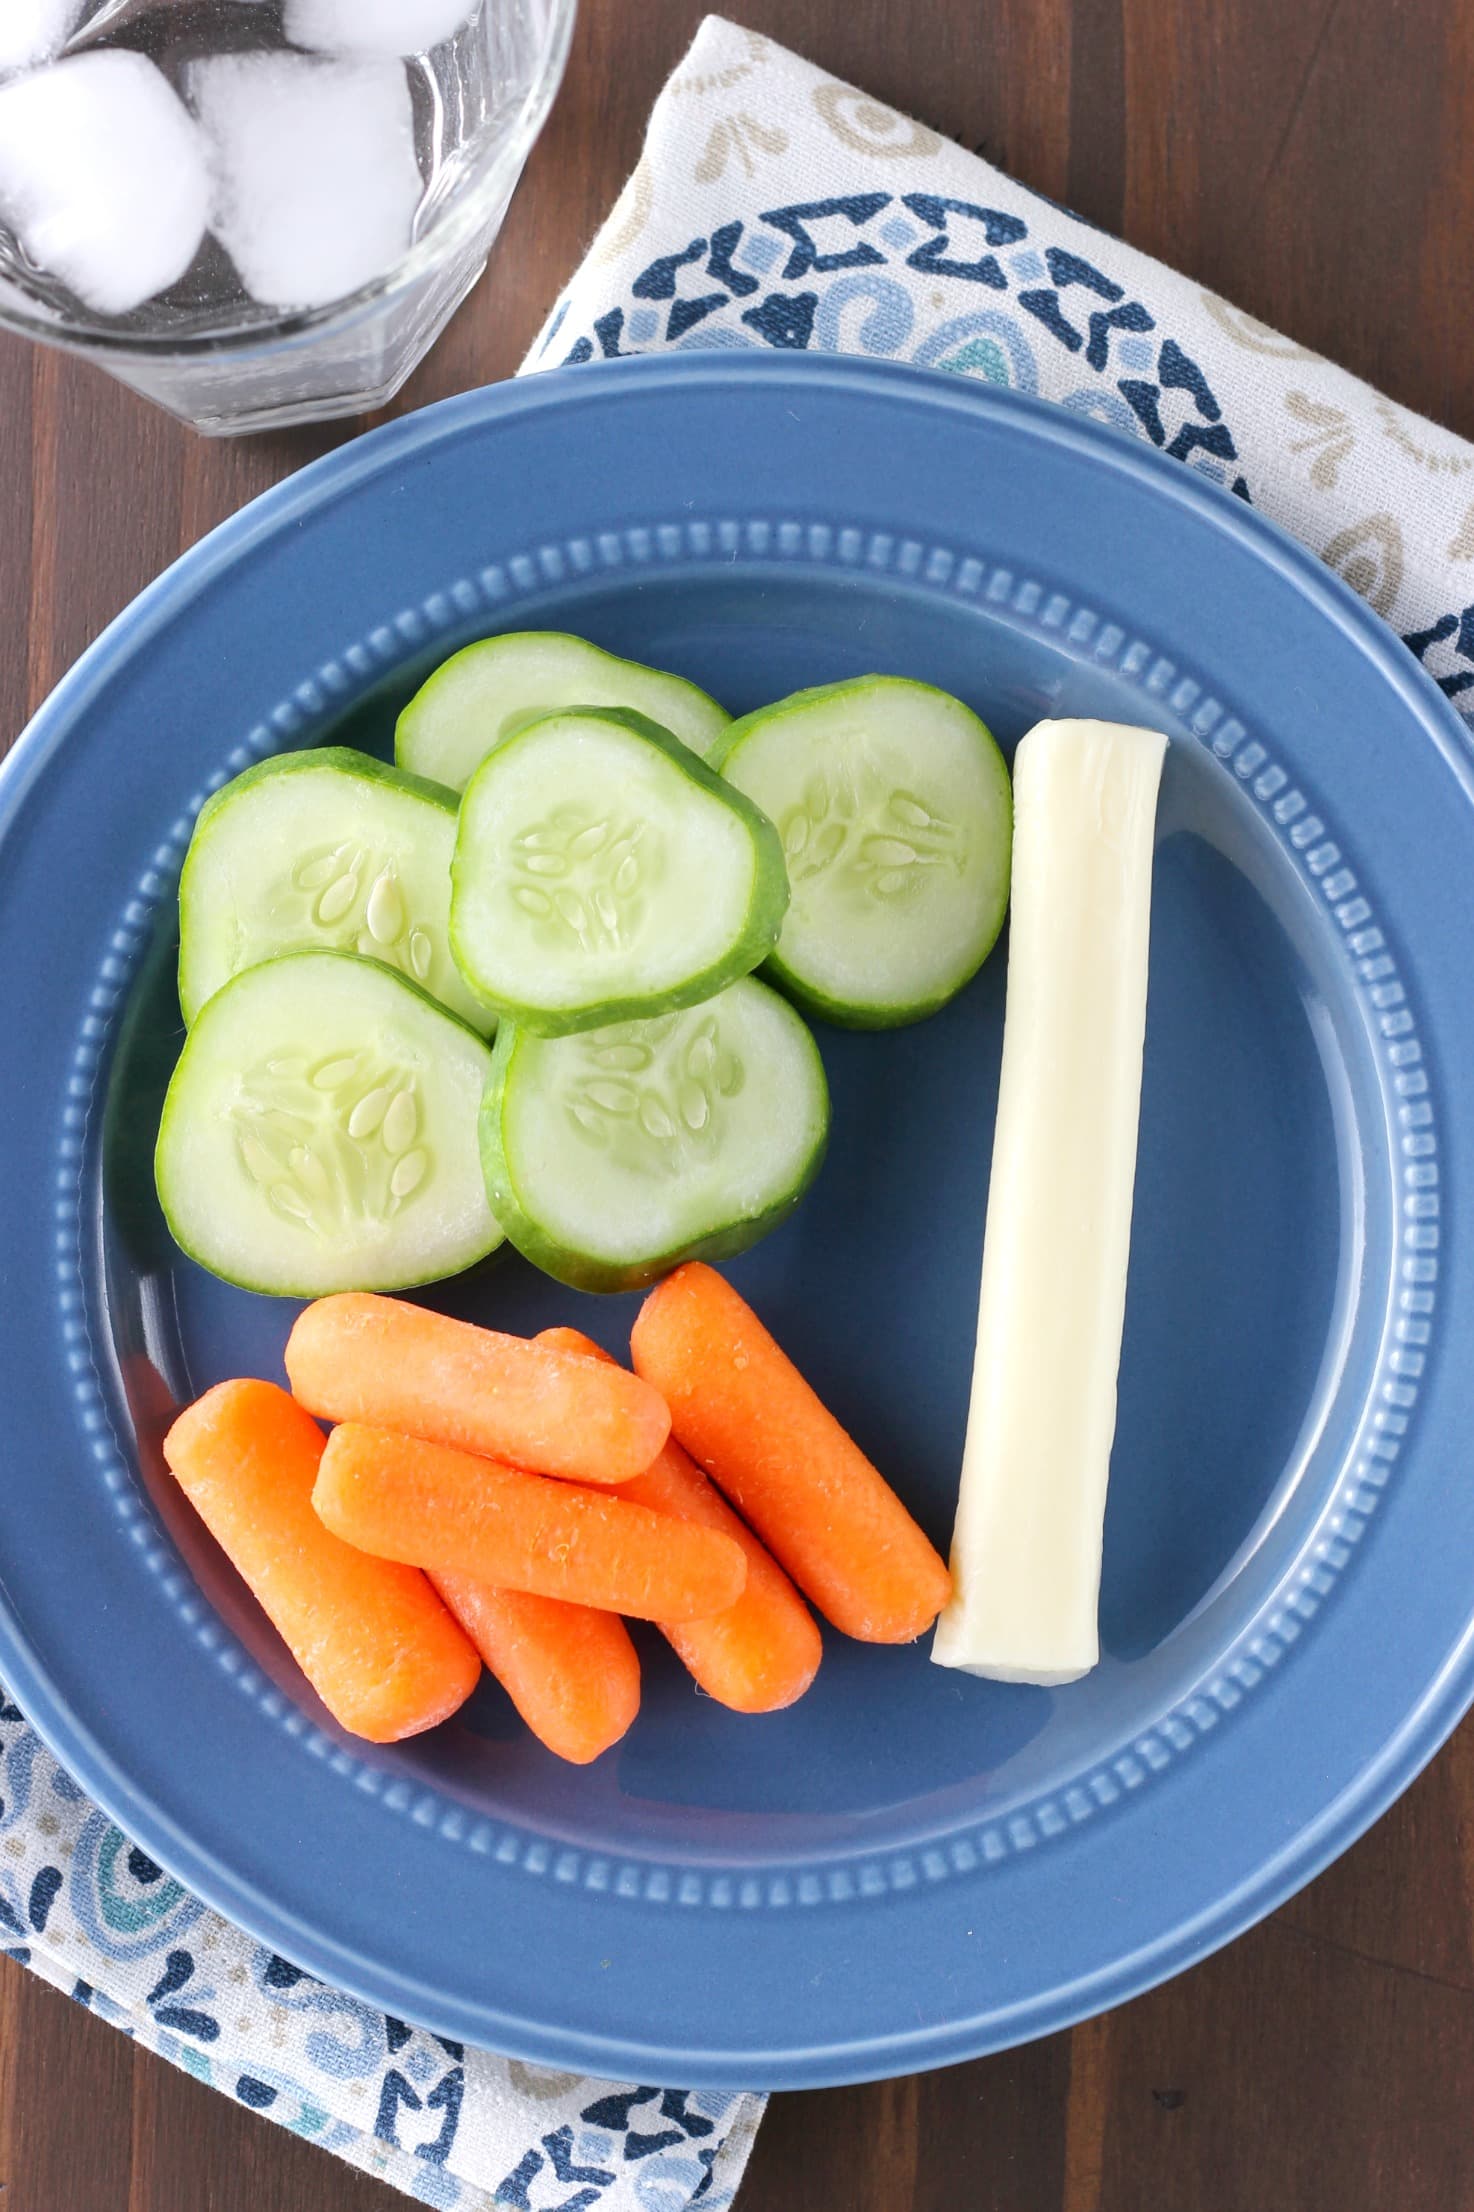 Sargento Cheese Stick with Carrots and Cucumbers